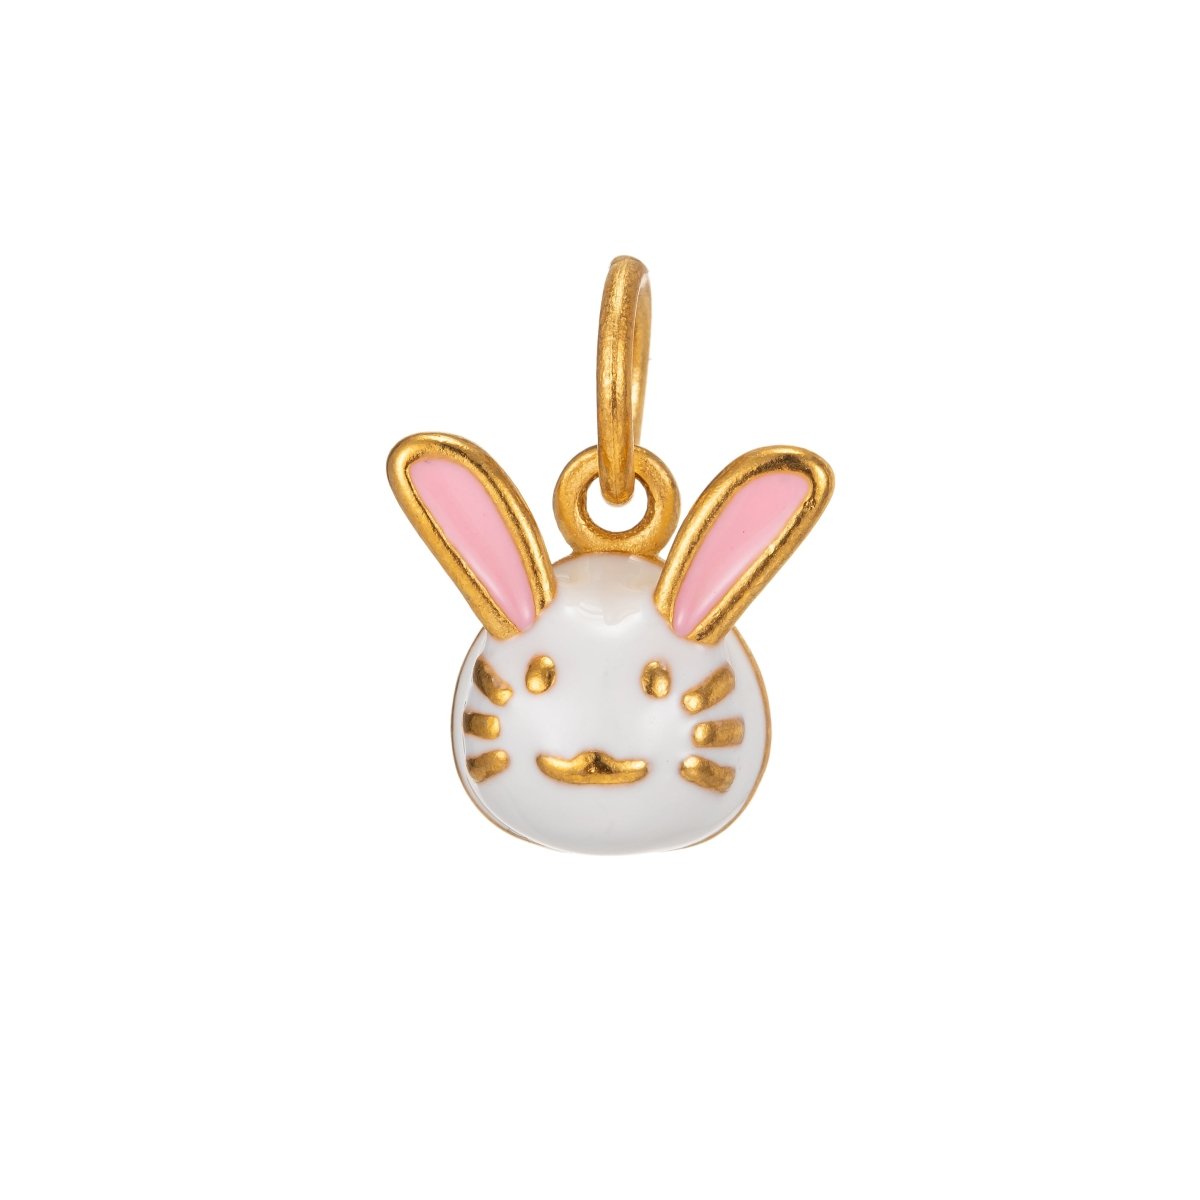 White Bunny Head Charm for Kids Jewelry Making Supply Necklace Bracelet Earring Charm Componnent in gold overlayC-631 - DLUXCA